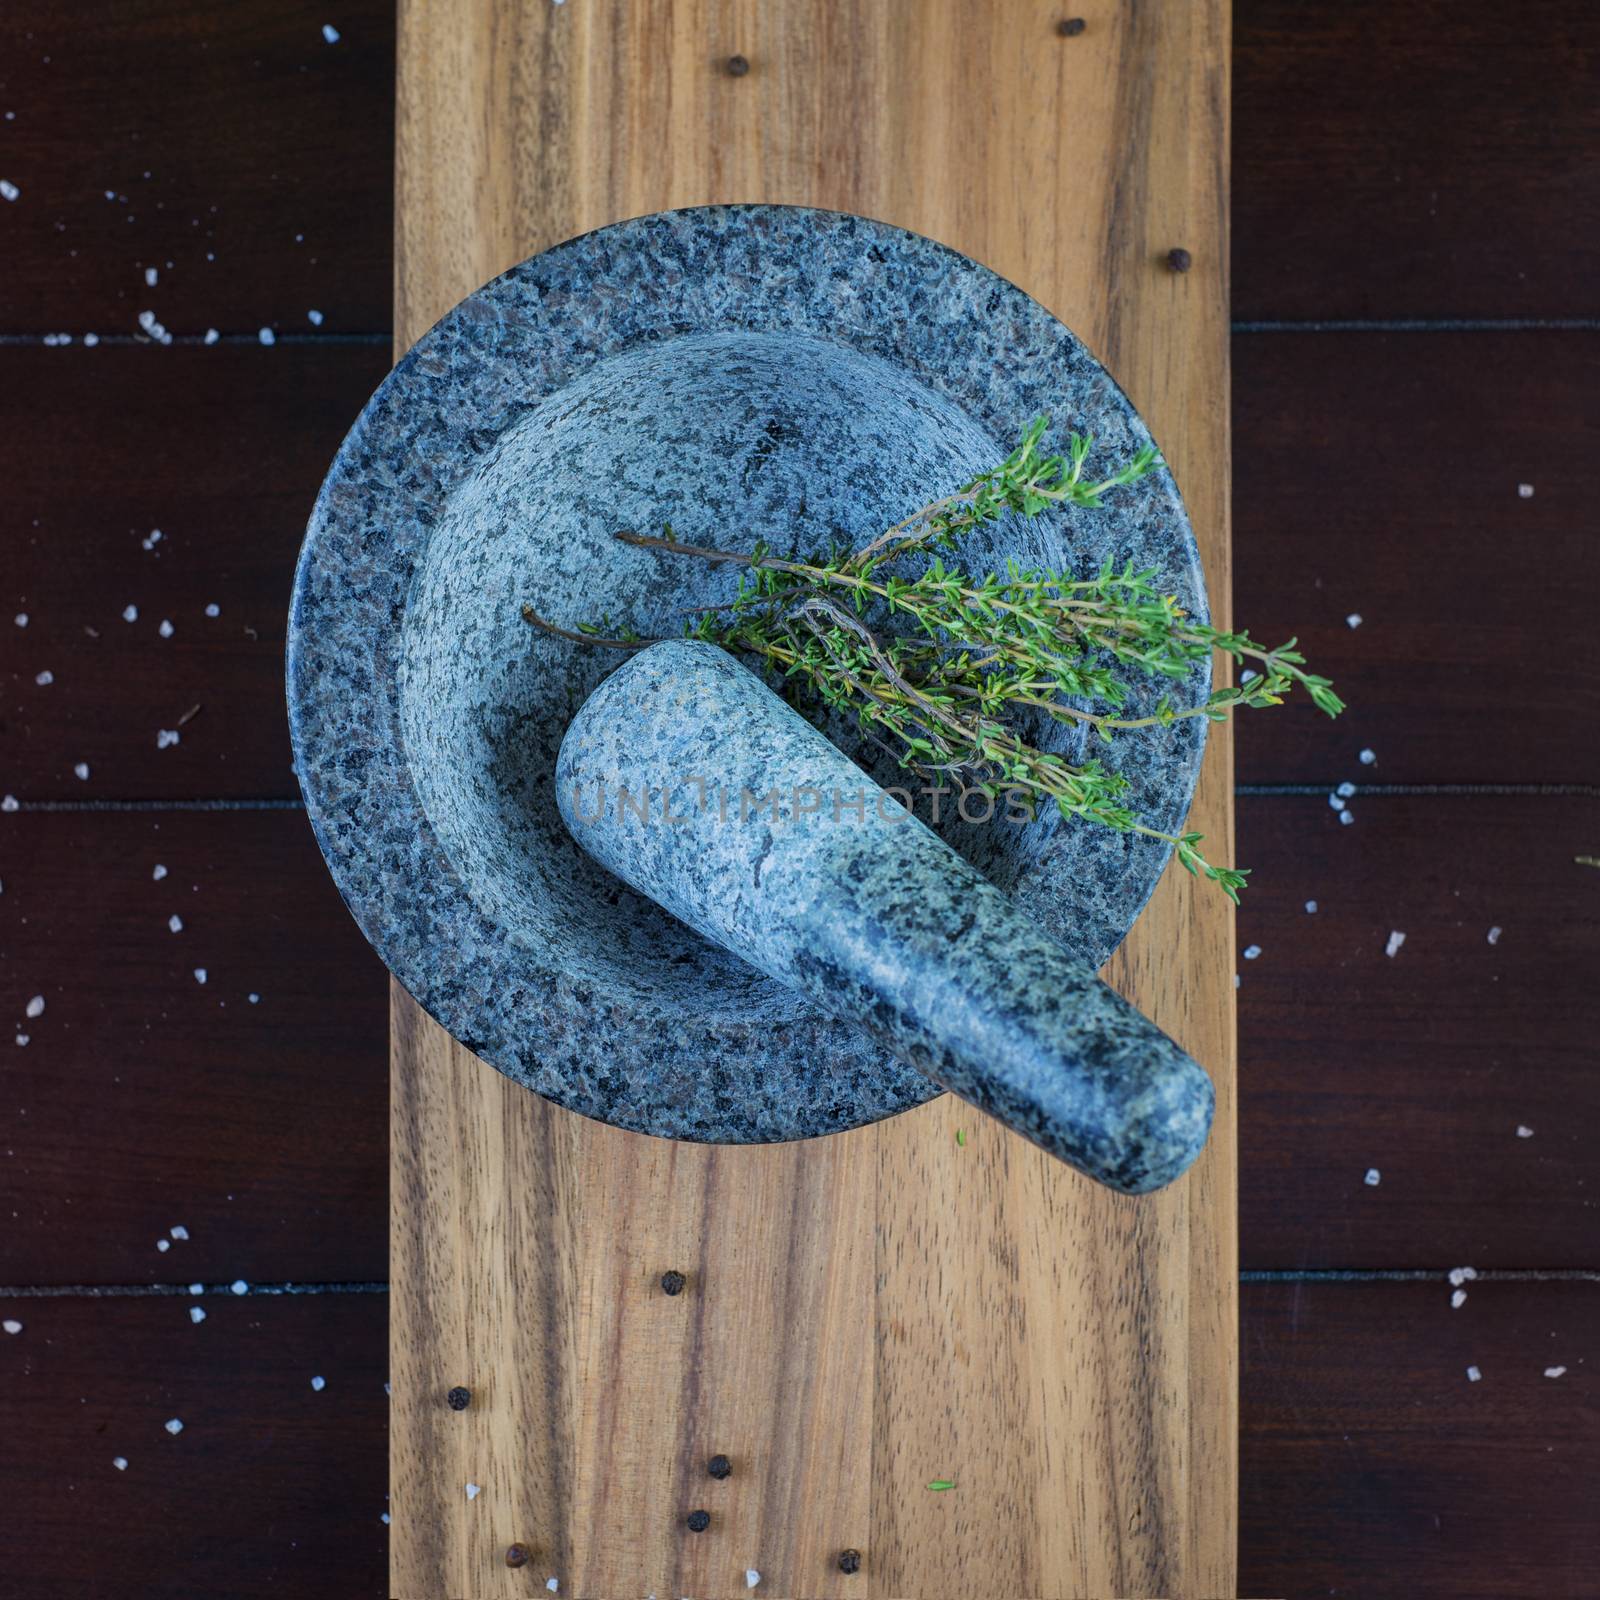 Stone mortar and herbs by rgbspace